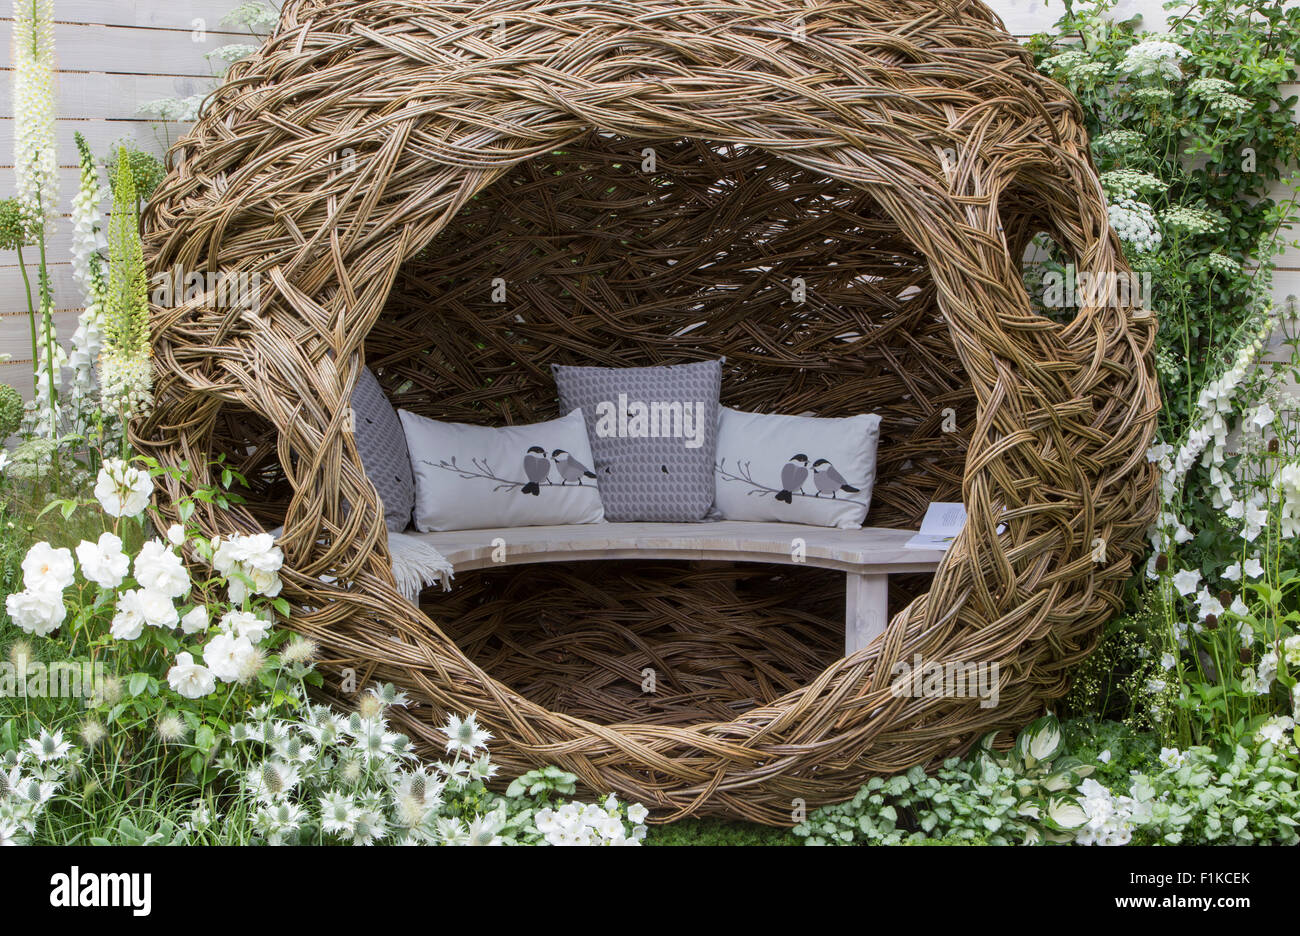 Garden with Modern patio woven willow structure bench bird cushions border planted with white flowering flowers plants painted white fence UK Stock Photo